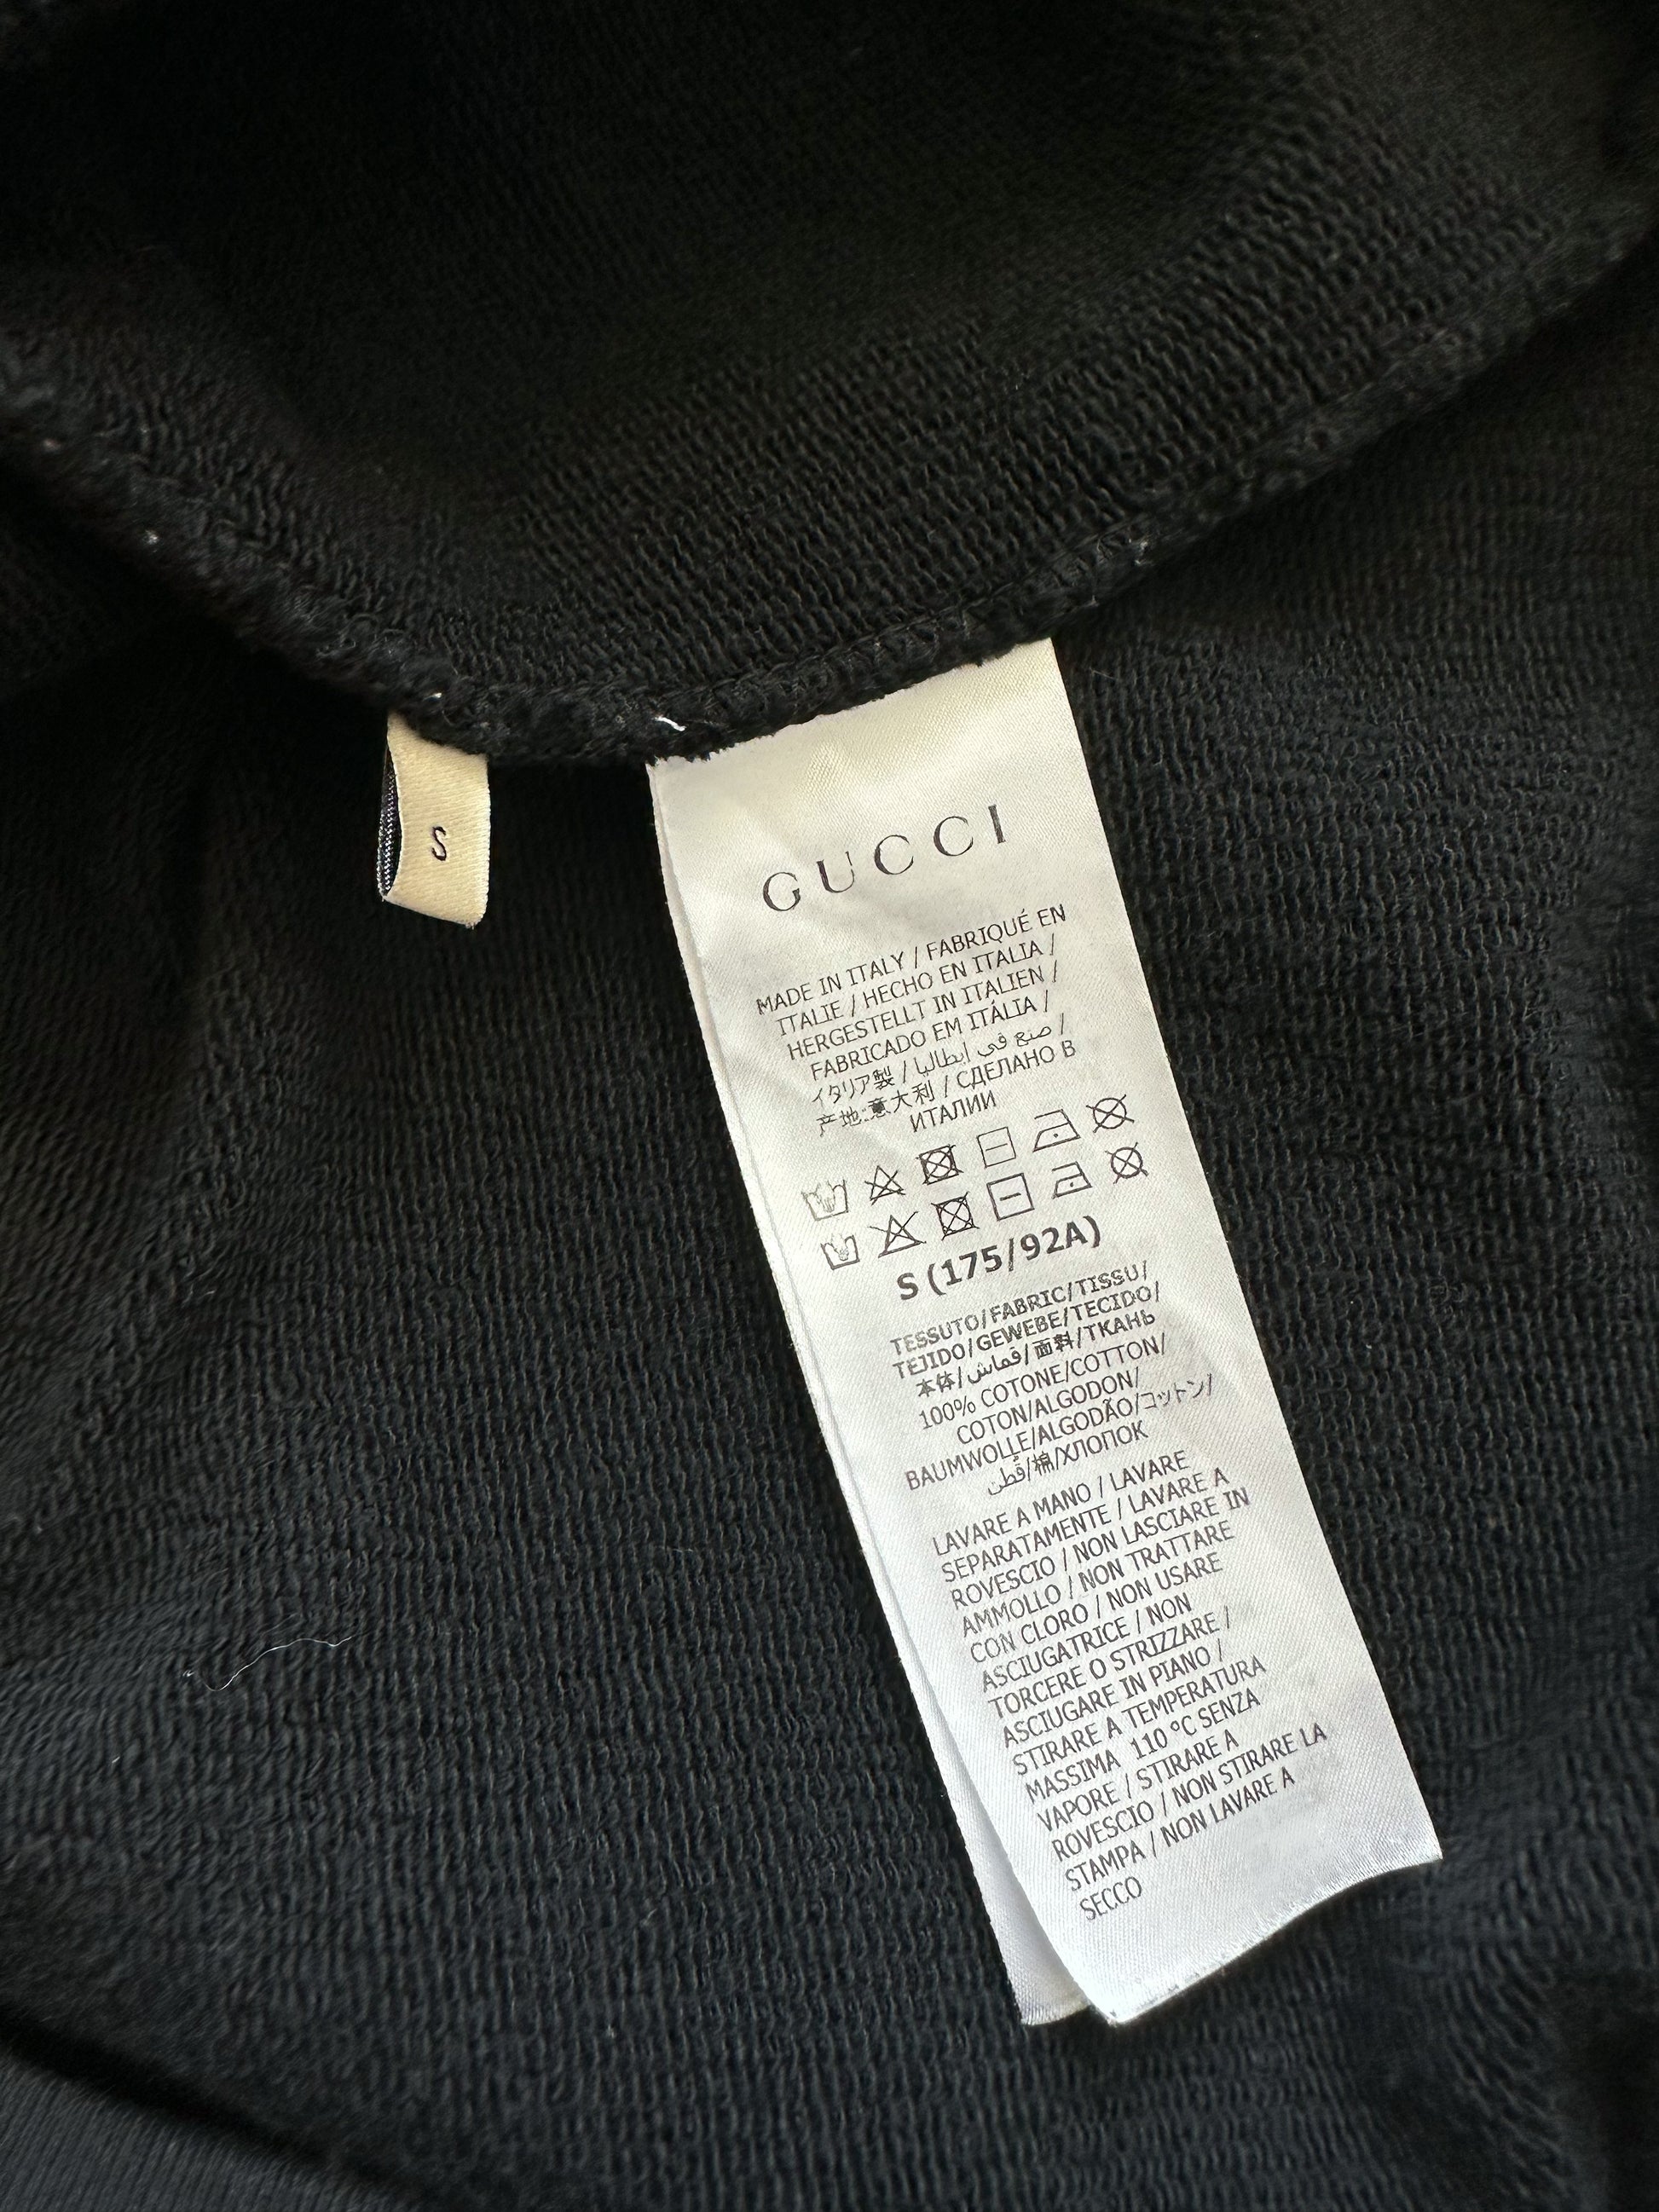 GUCCI The North Face Cotton Sweatshirt Hoodie for Women